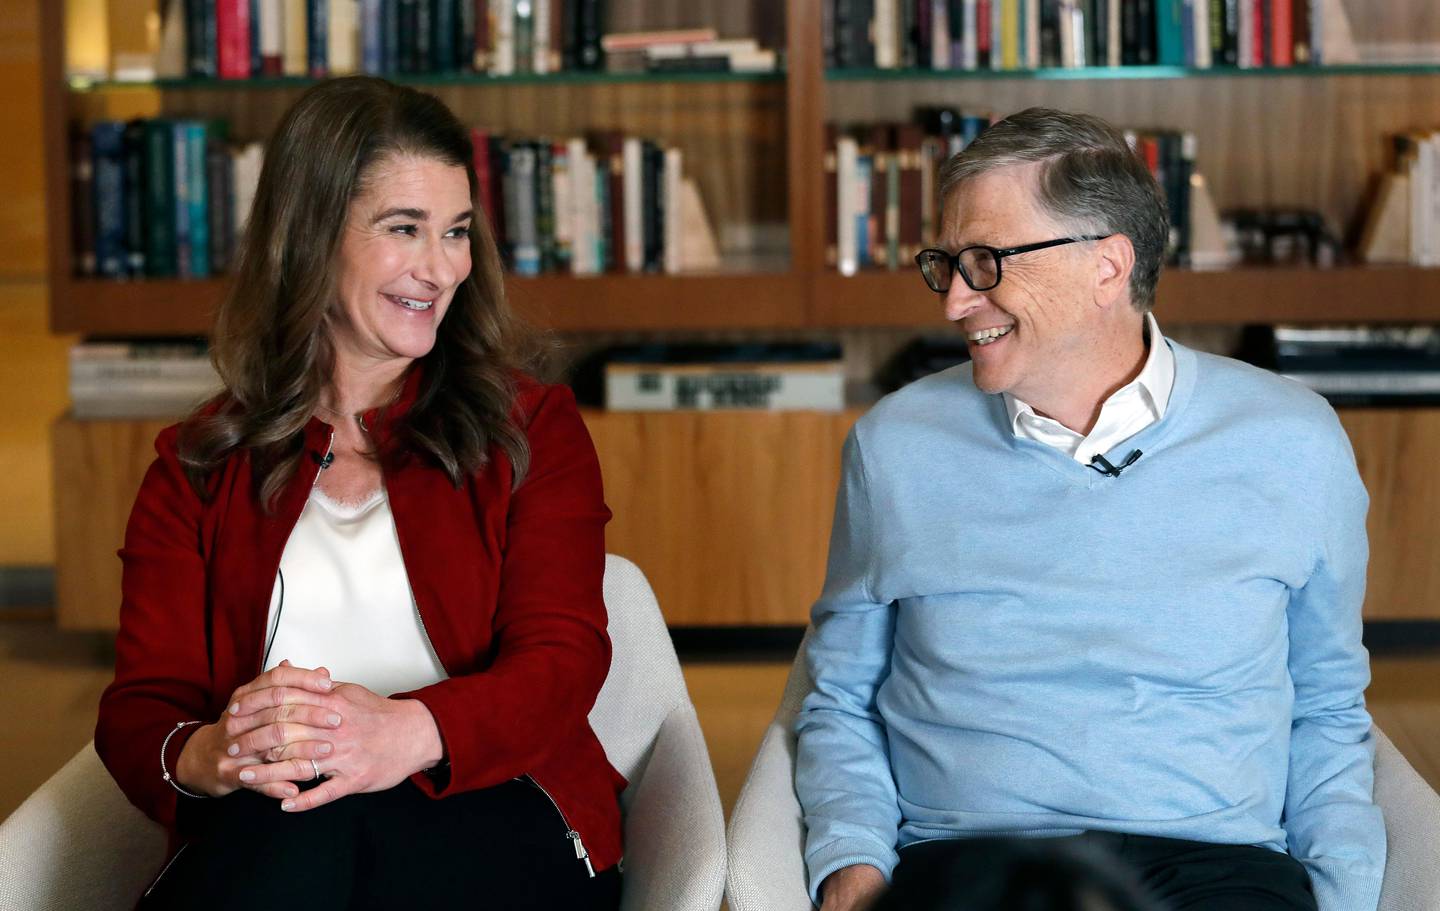 In this Feb. 1, 2019, Bill and Melinda Gates look toward each other and smile while being interviewed in Kirkland, Wash. The couple, whose foundation has the largest endowment in the world, are pushing back against a new wave of criticism about whether billionaire philanthropy is a force for good. They said they?Äôre not fazed by recent blowback against wealthy giving, including viral moments at the World Economic Forum and the shifting political conversation about taxes and socialism. (AP Photo/Elaine Thompson)